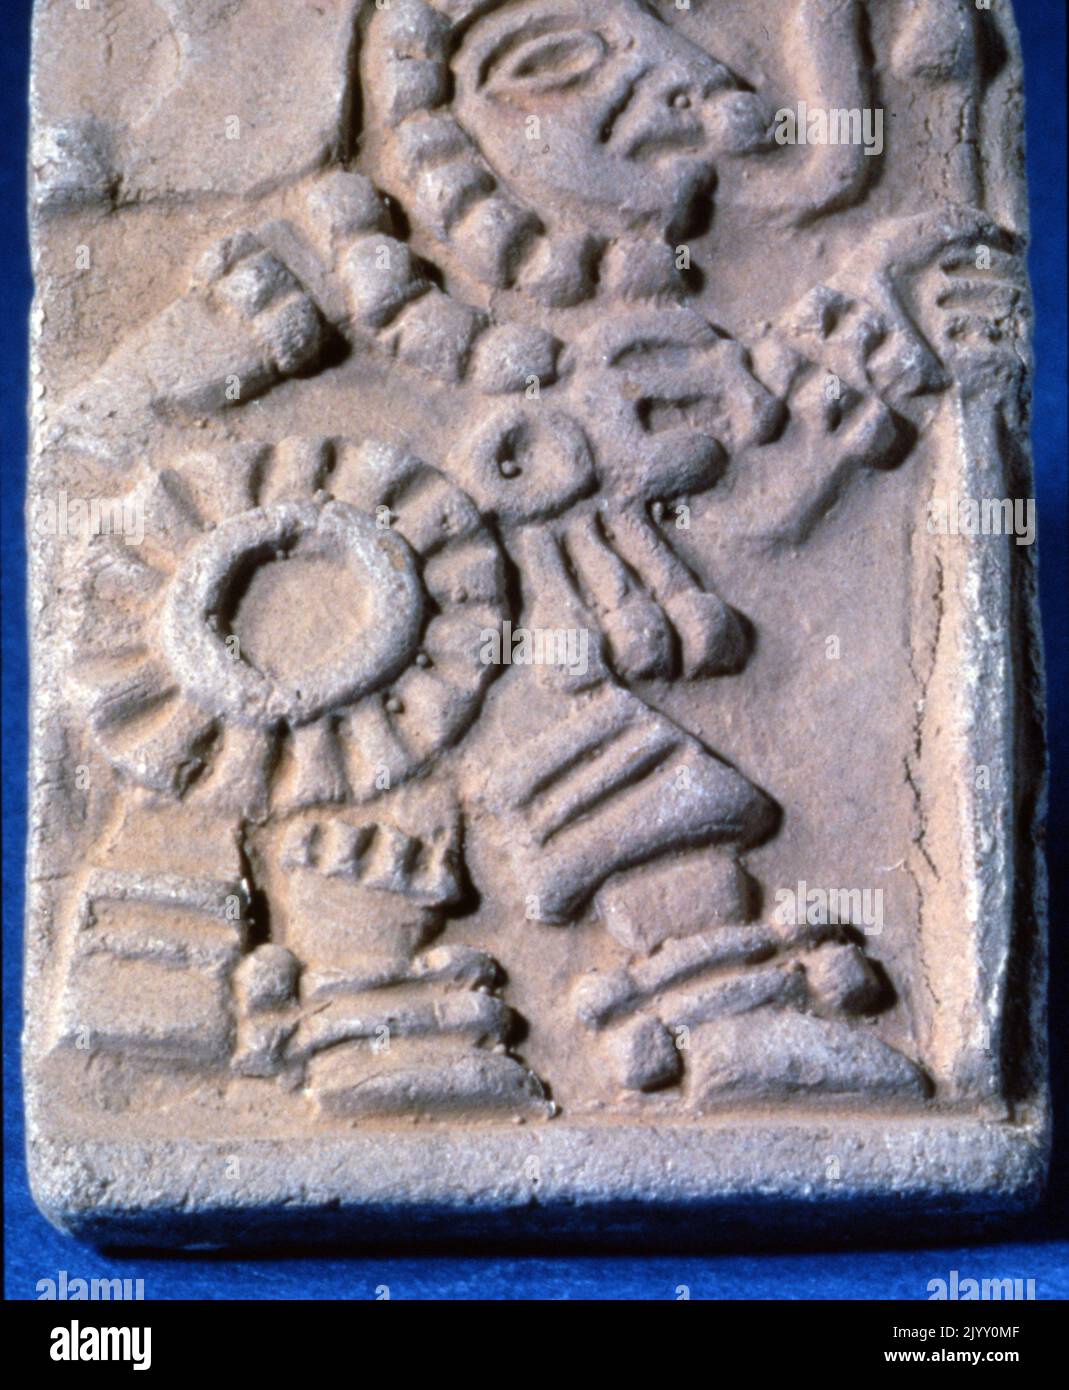 Toltec ceramic relief 900-1250 AD, Orlando museum. The Toltec culture is an archaeological Mesoamerican culture that dominated a state centred in Tula, Hidalgo, Mexico in the early post-classic period of Mesoamerican chronology (ca. 900-1168 CE). Stock Photo